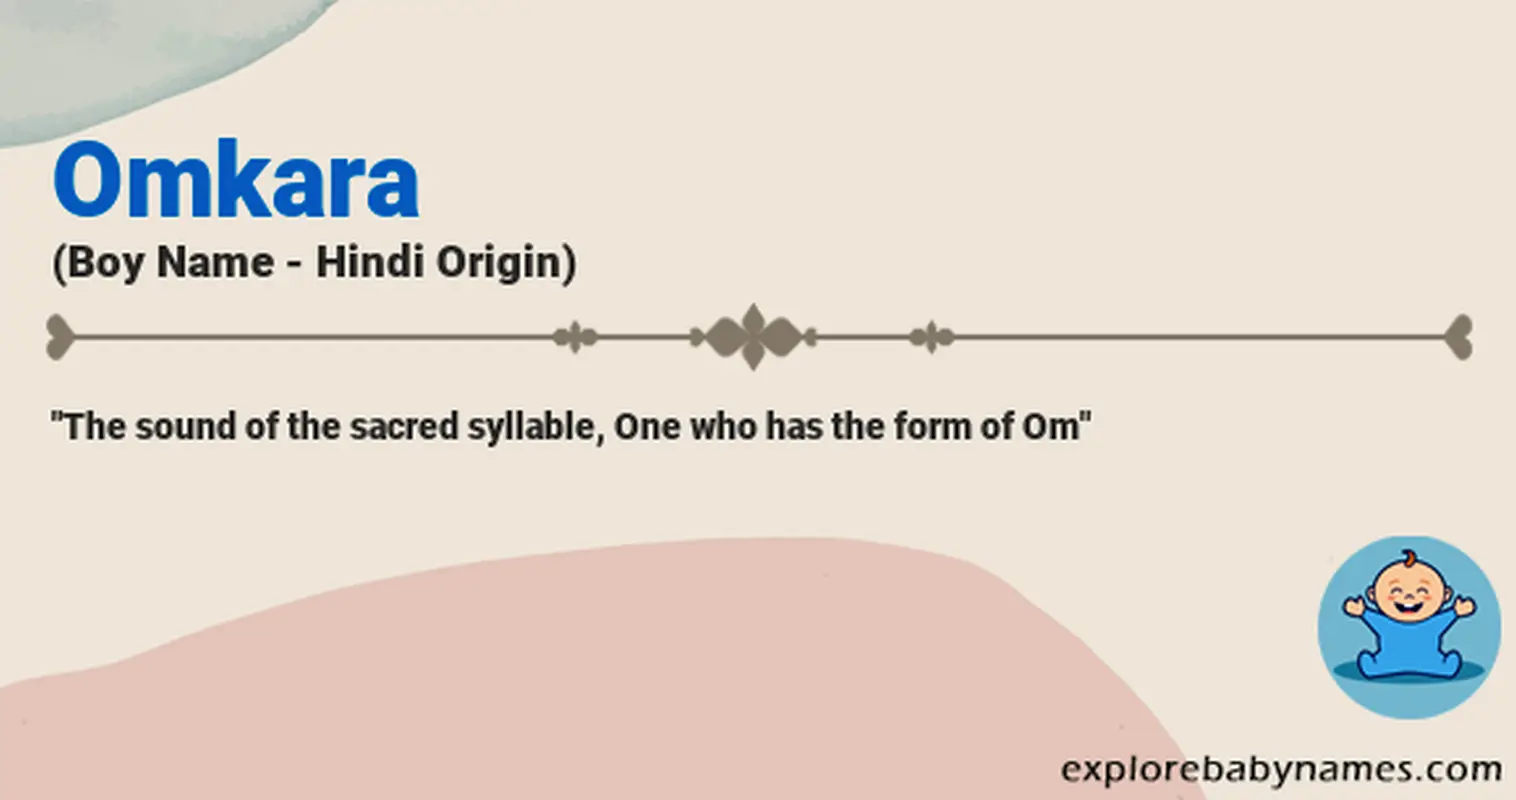 Meaning of Omkara